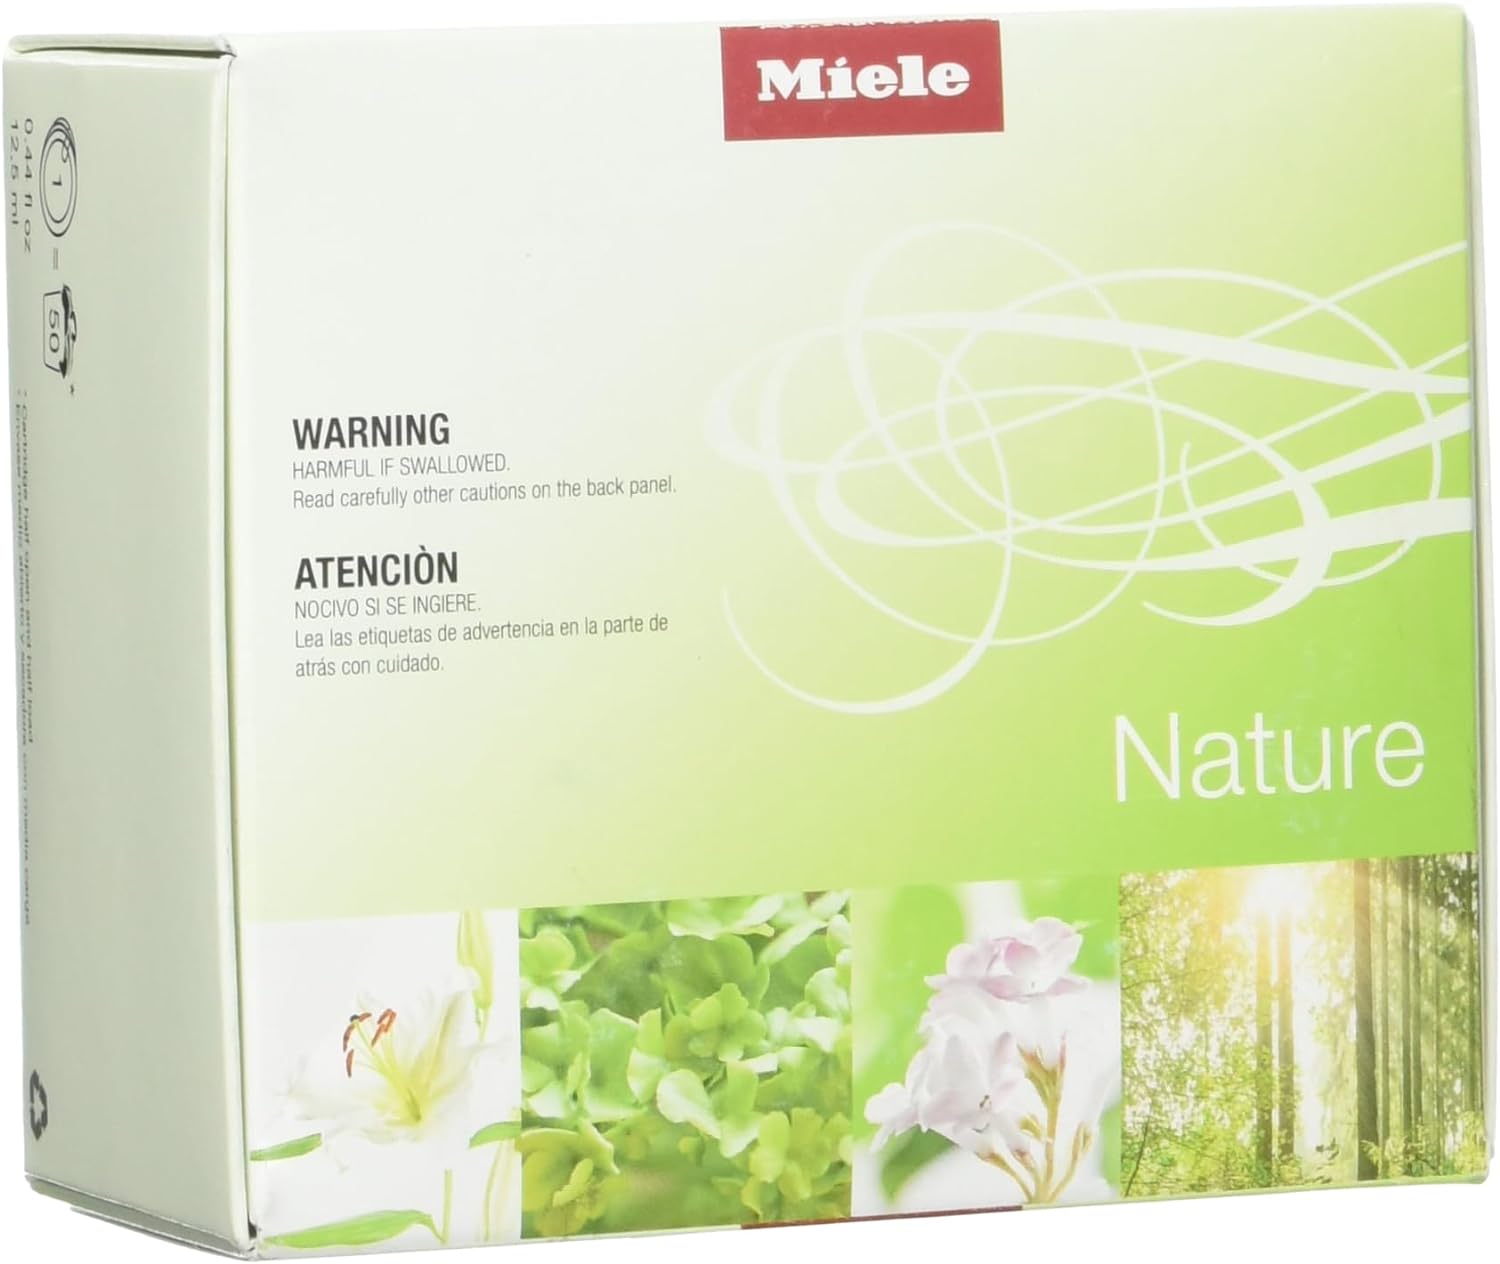 Miele Nature Fragrance Flacon for 50 Dryer Cycles Laundry Accessory : Health & Household